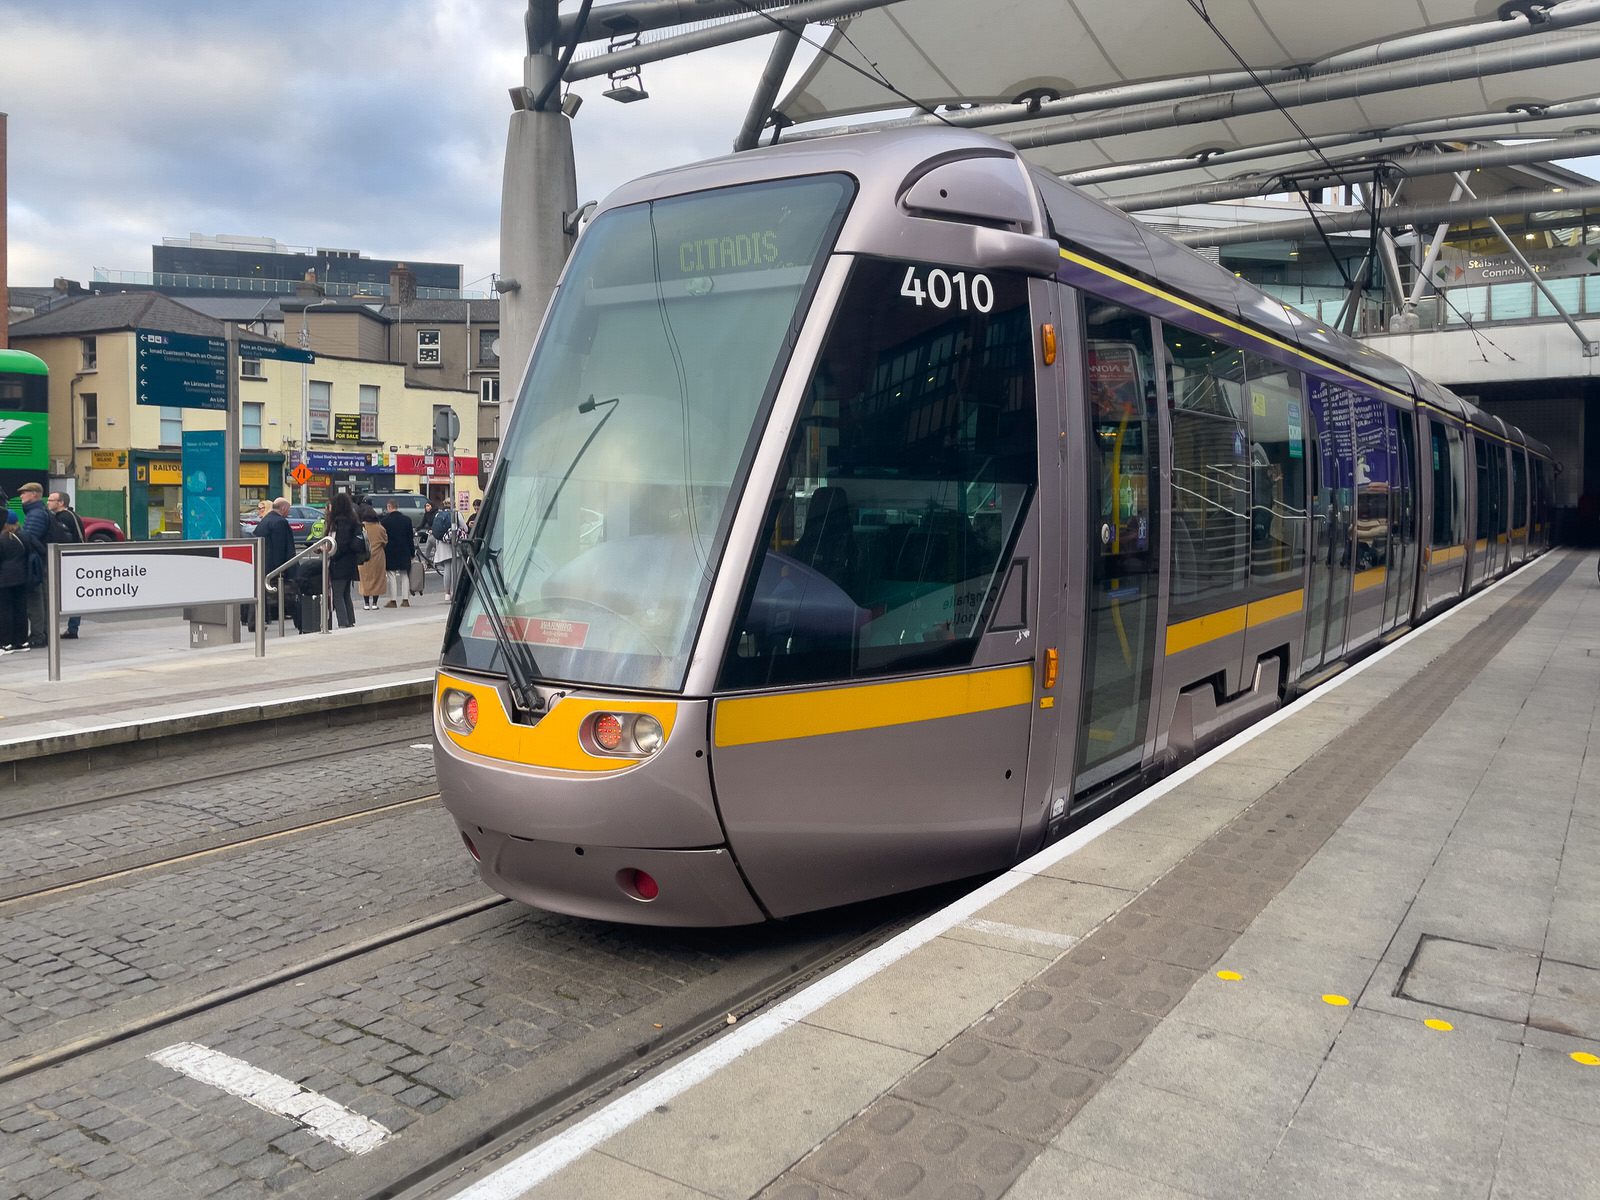 TRAM 4010 WAS STRANDED AT CONNOLLY STATION [DAY AFTER RIOT IN CITY CENTRE]-225320-1